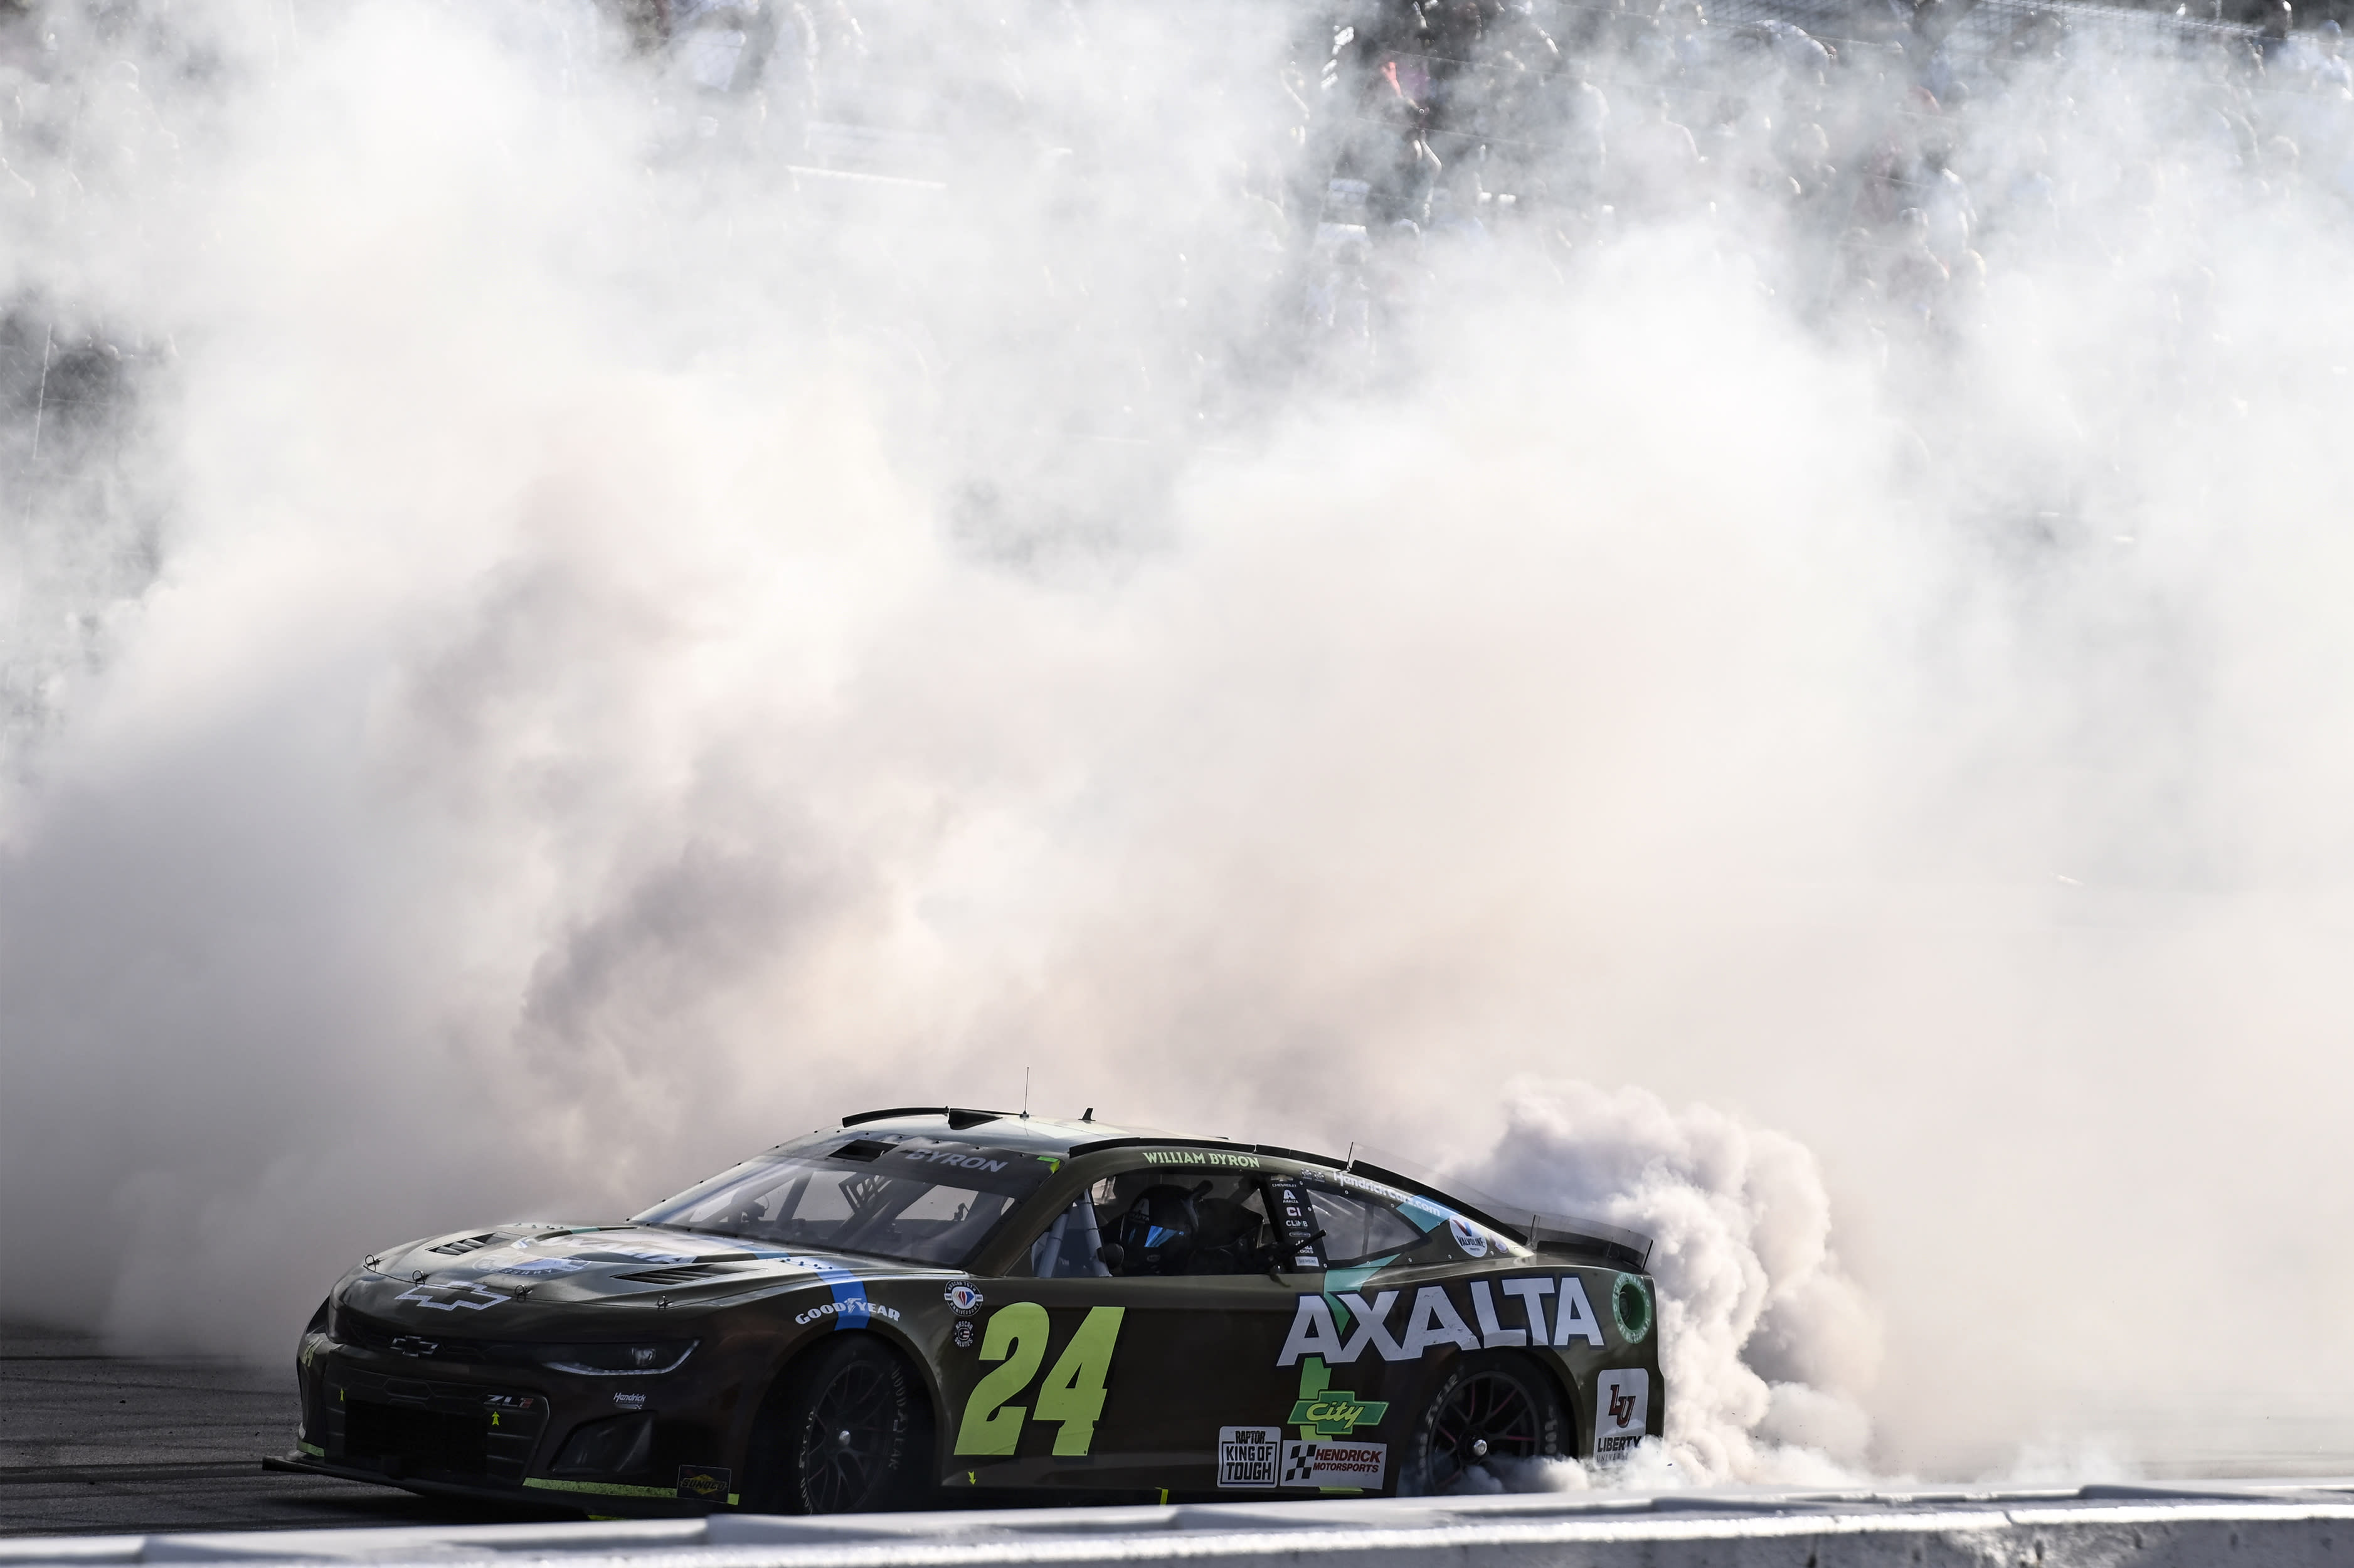 NASCAR results William Byron wins Throwback race at Darlington ahead of Kevin Harvick, Chase Elliott